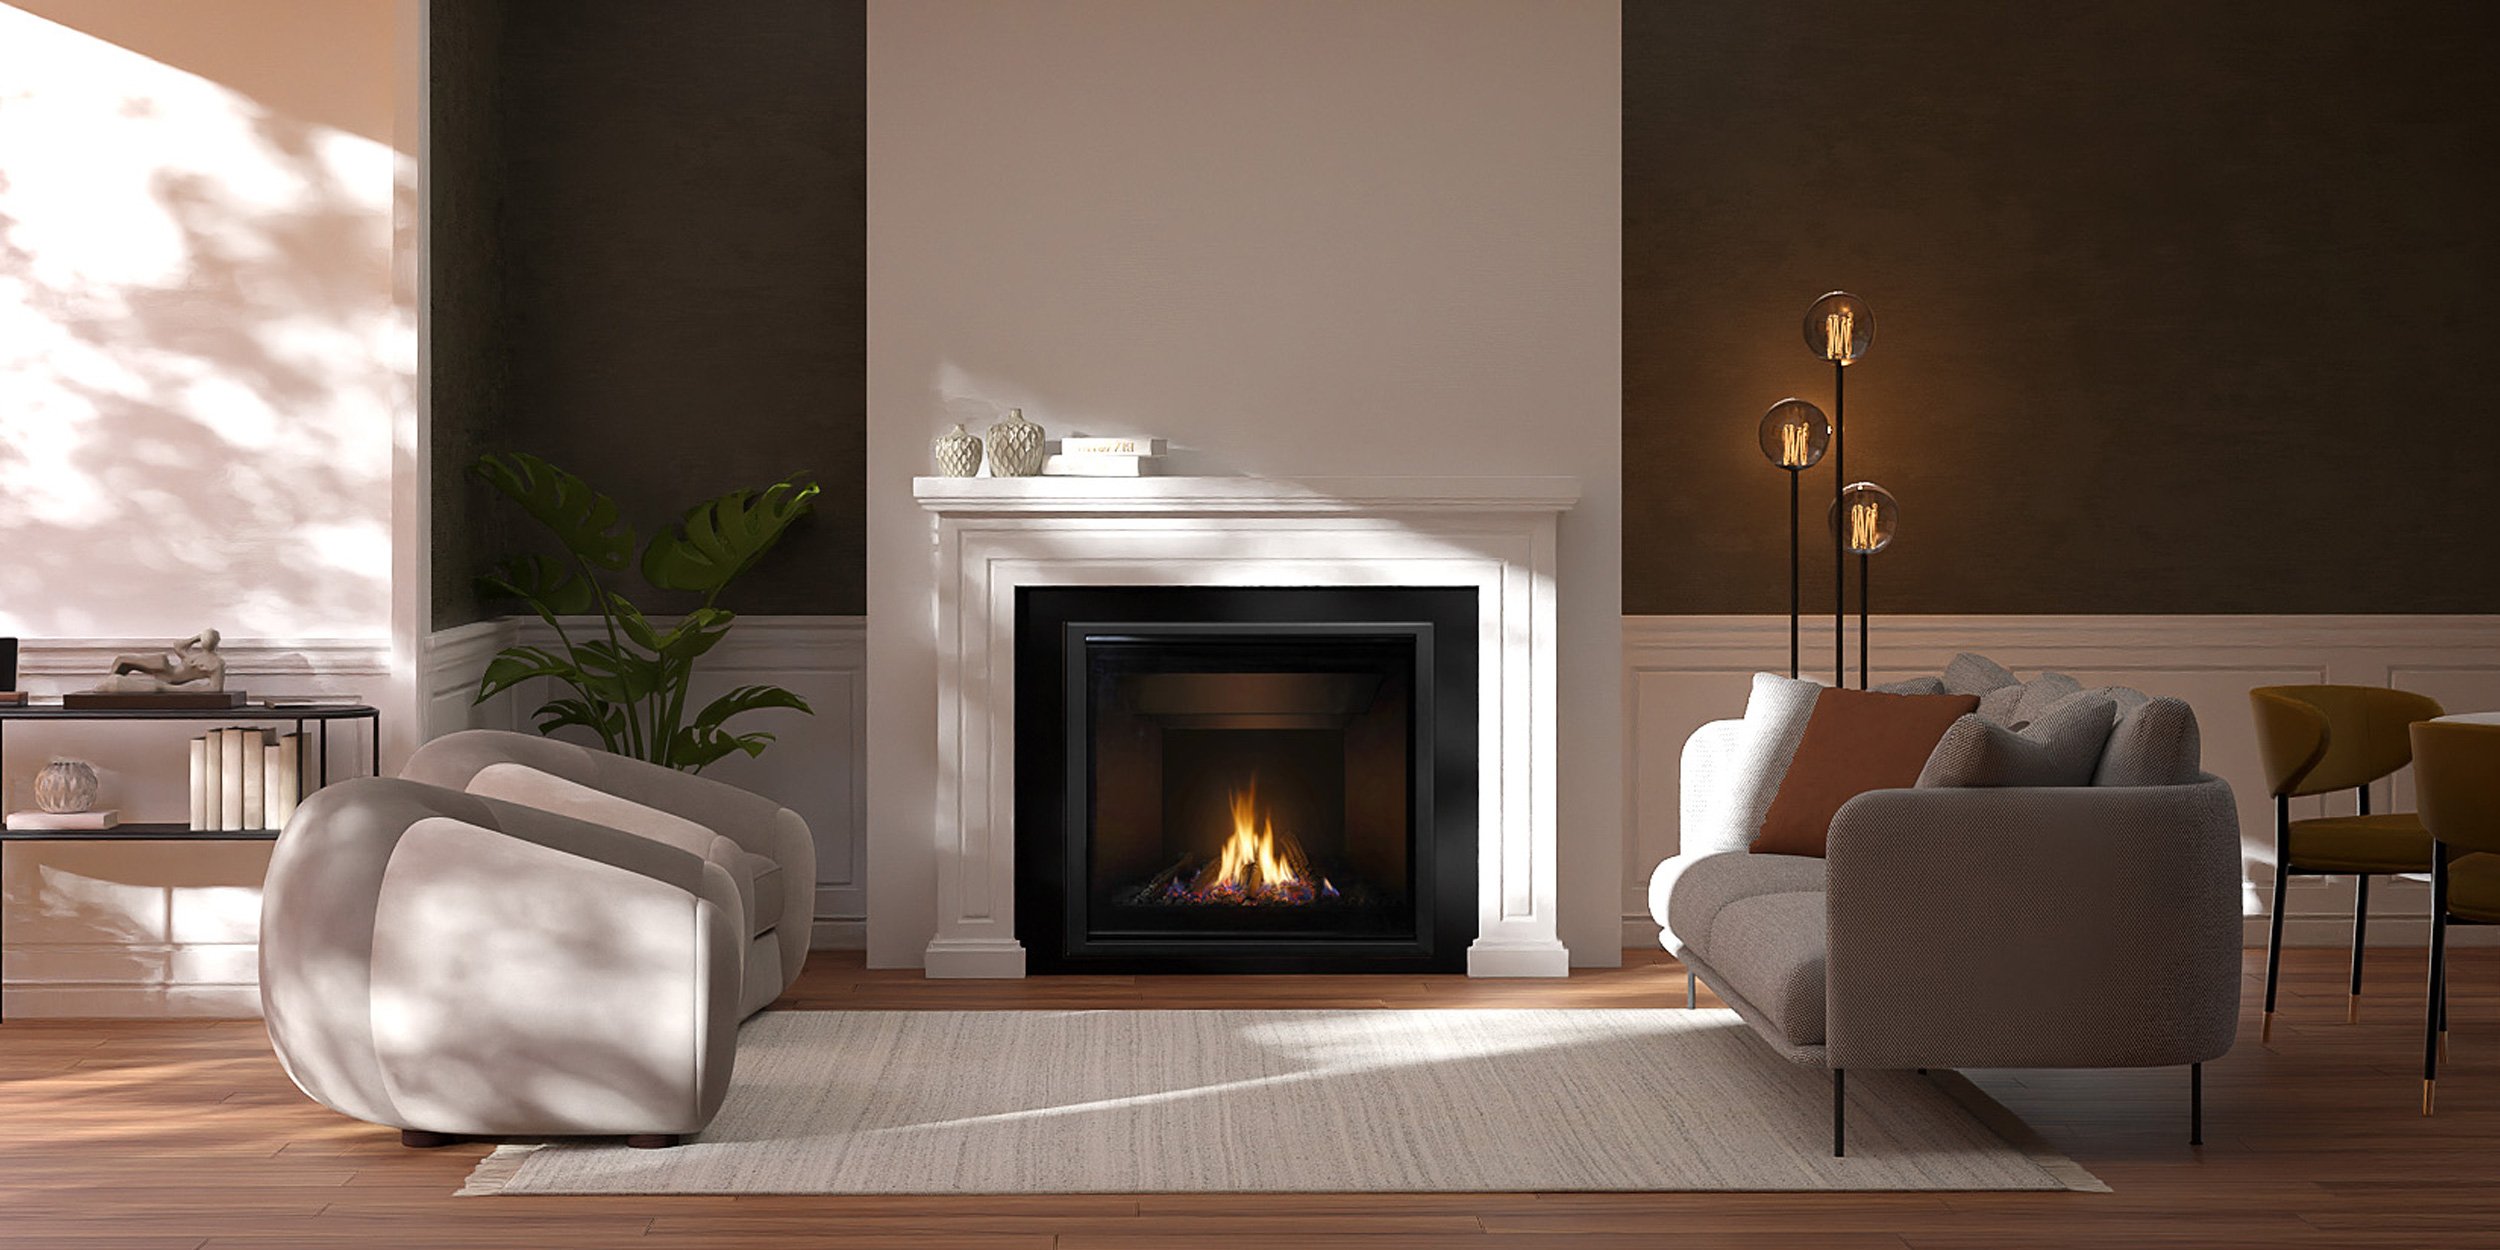 Minimalist living room with comfortable furniture with an black inbuilt gas fire that demands your attention